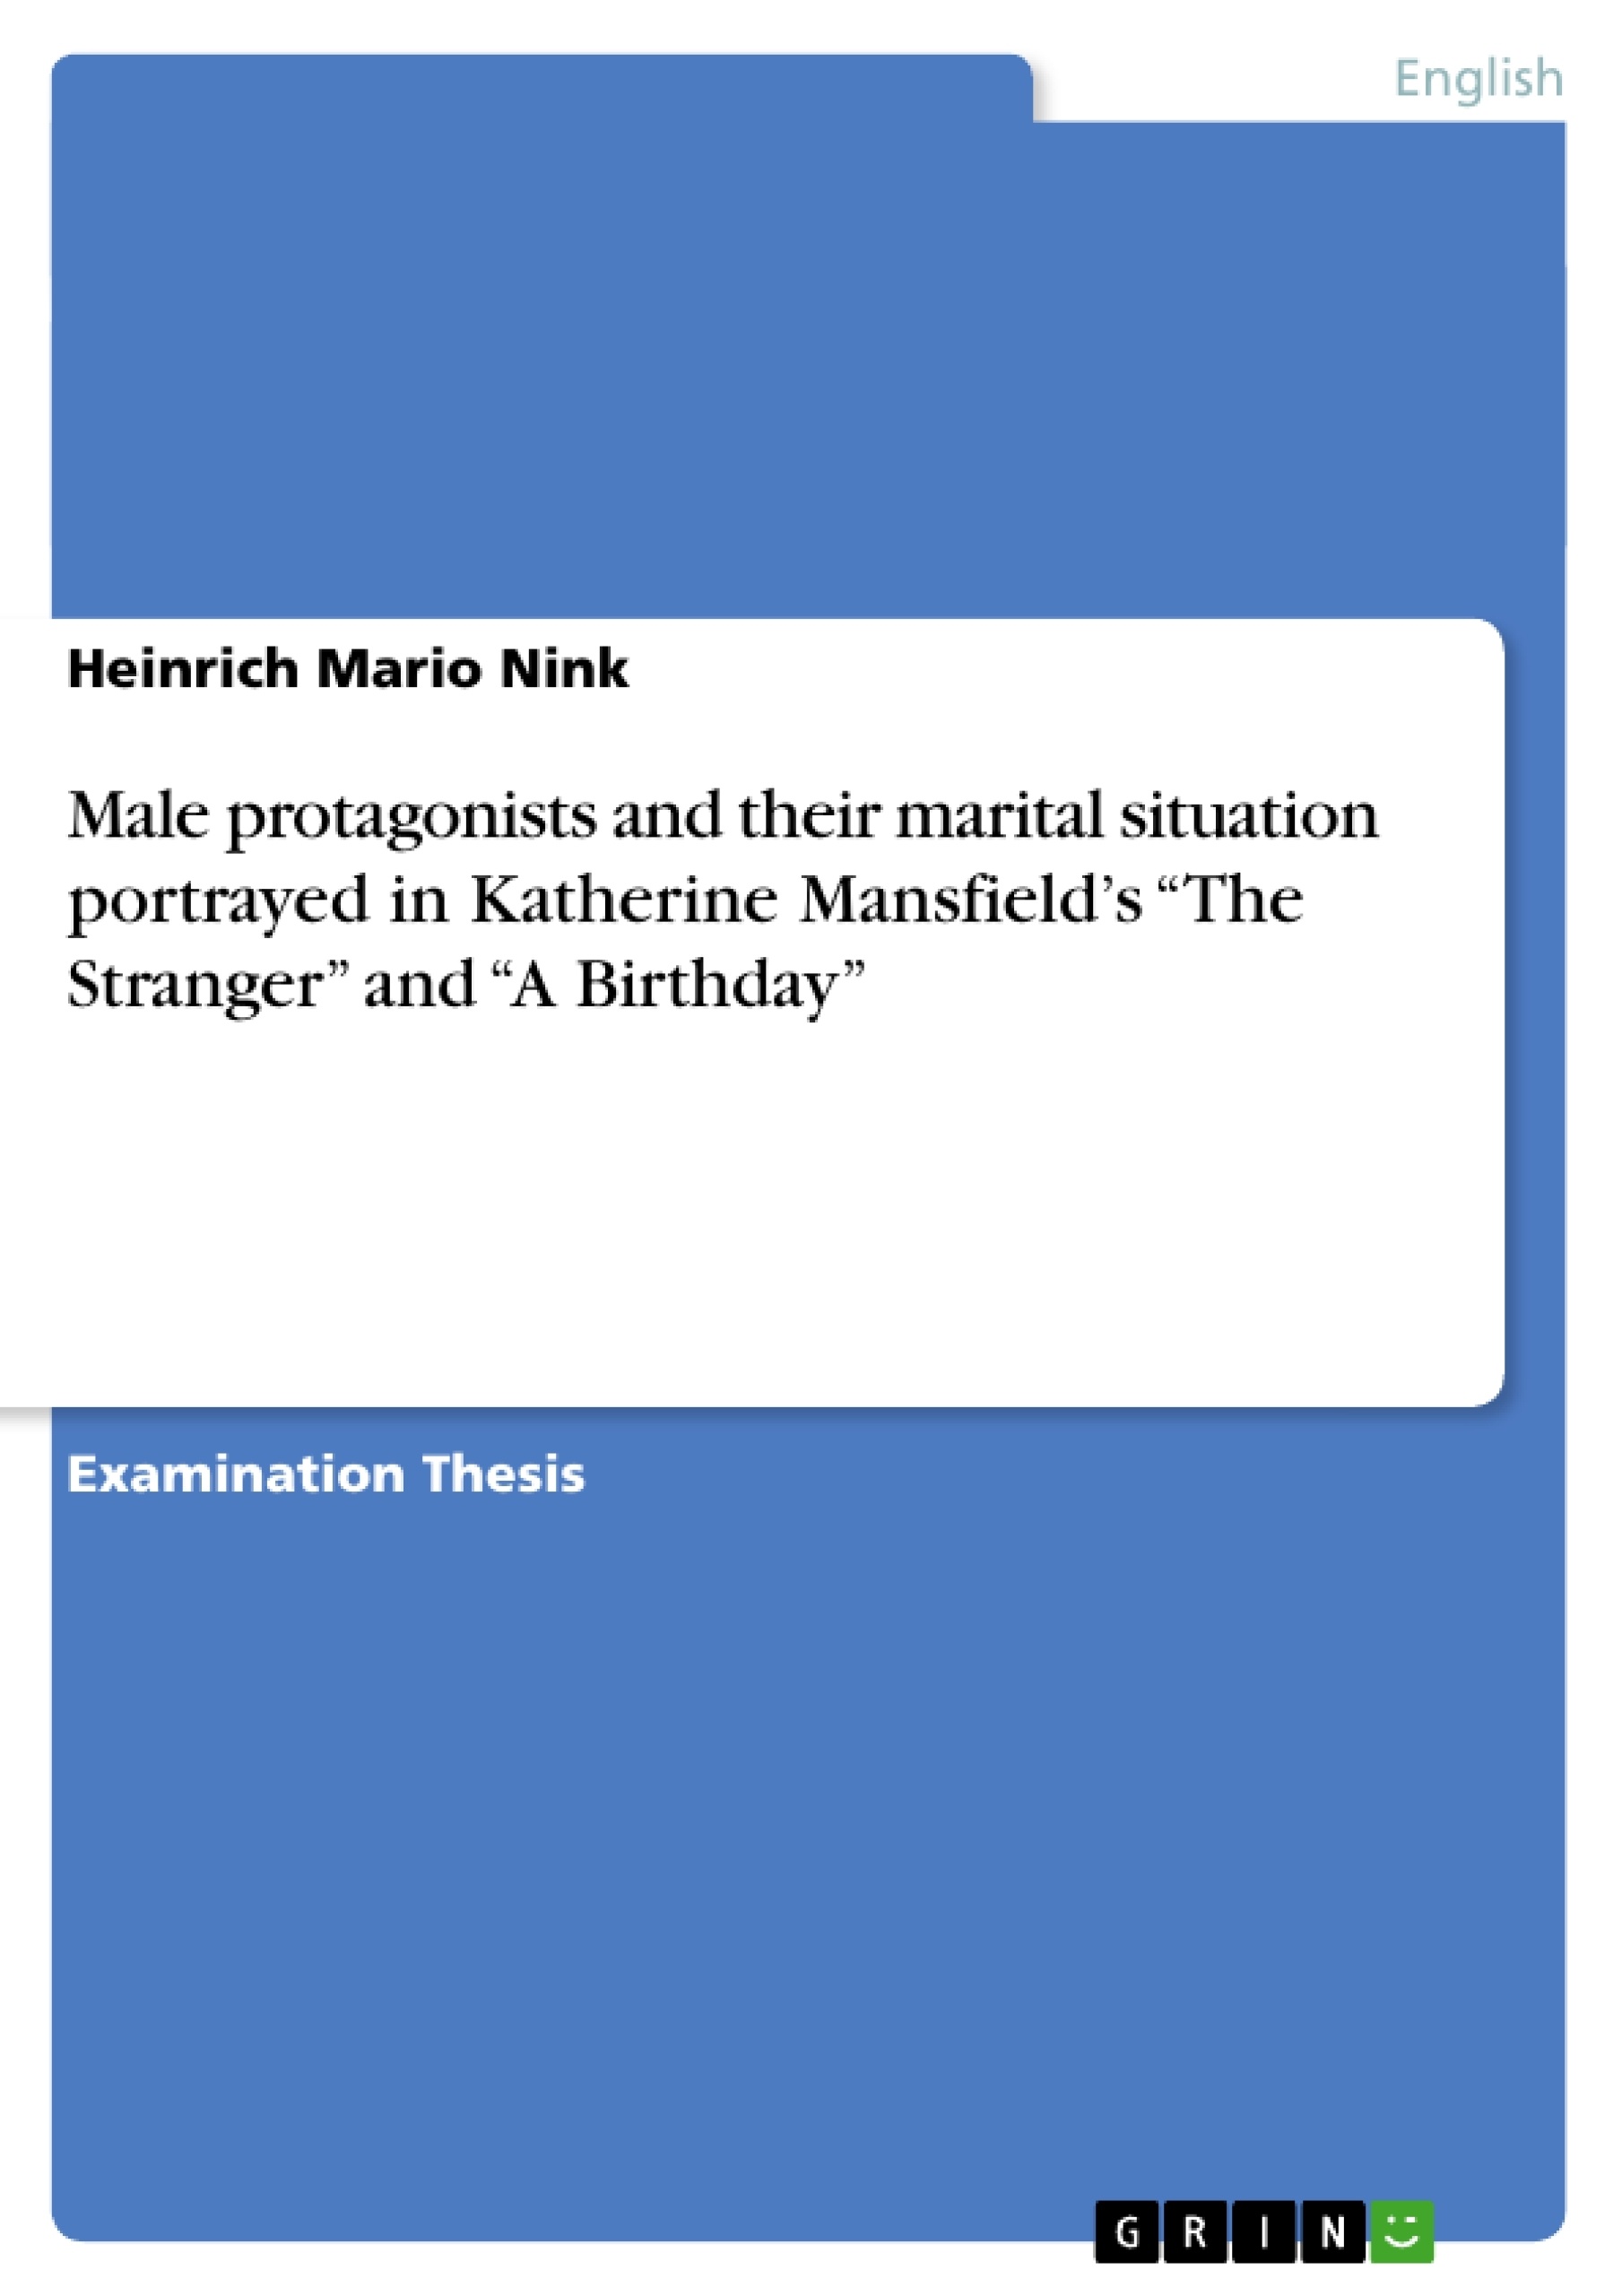 Título: Male protagonists and their marital situation portrayed in Katherine Mansfield’s “The Stranger” and “A Birthday”